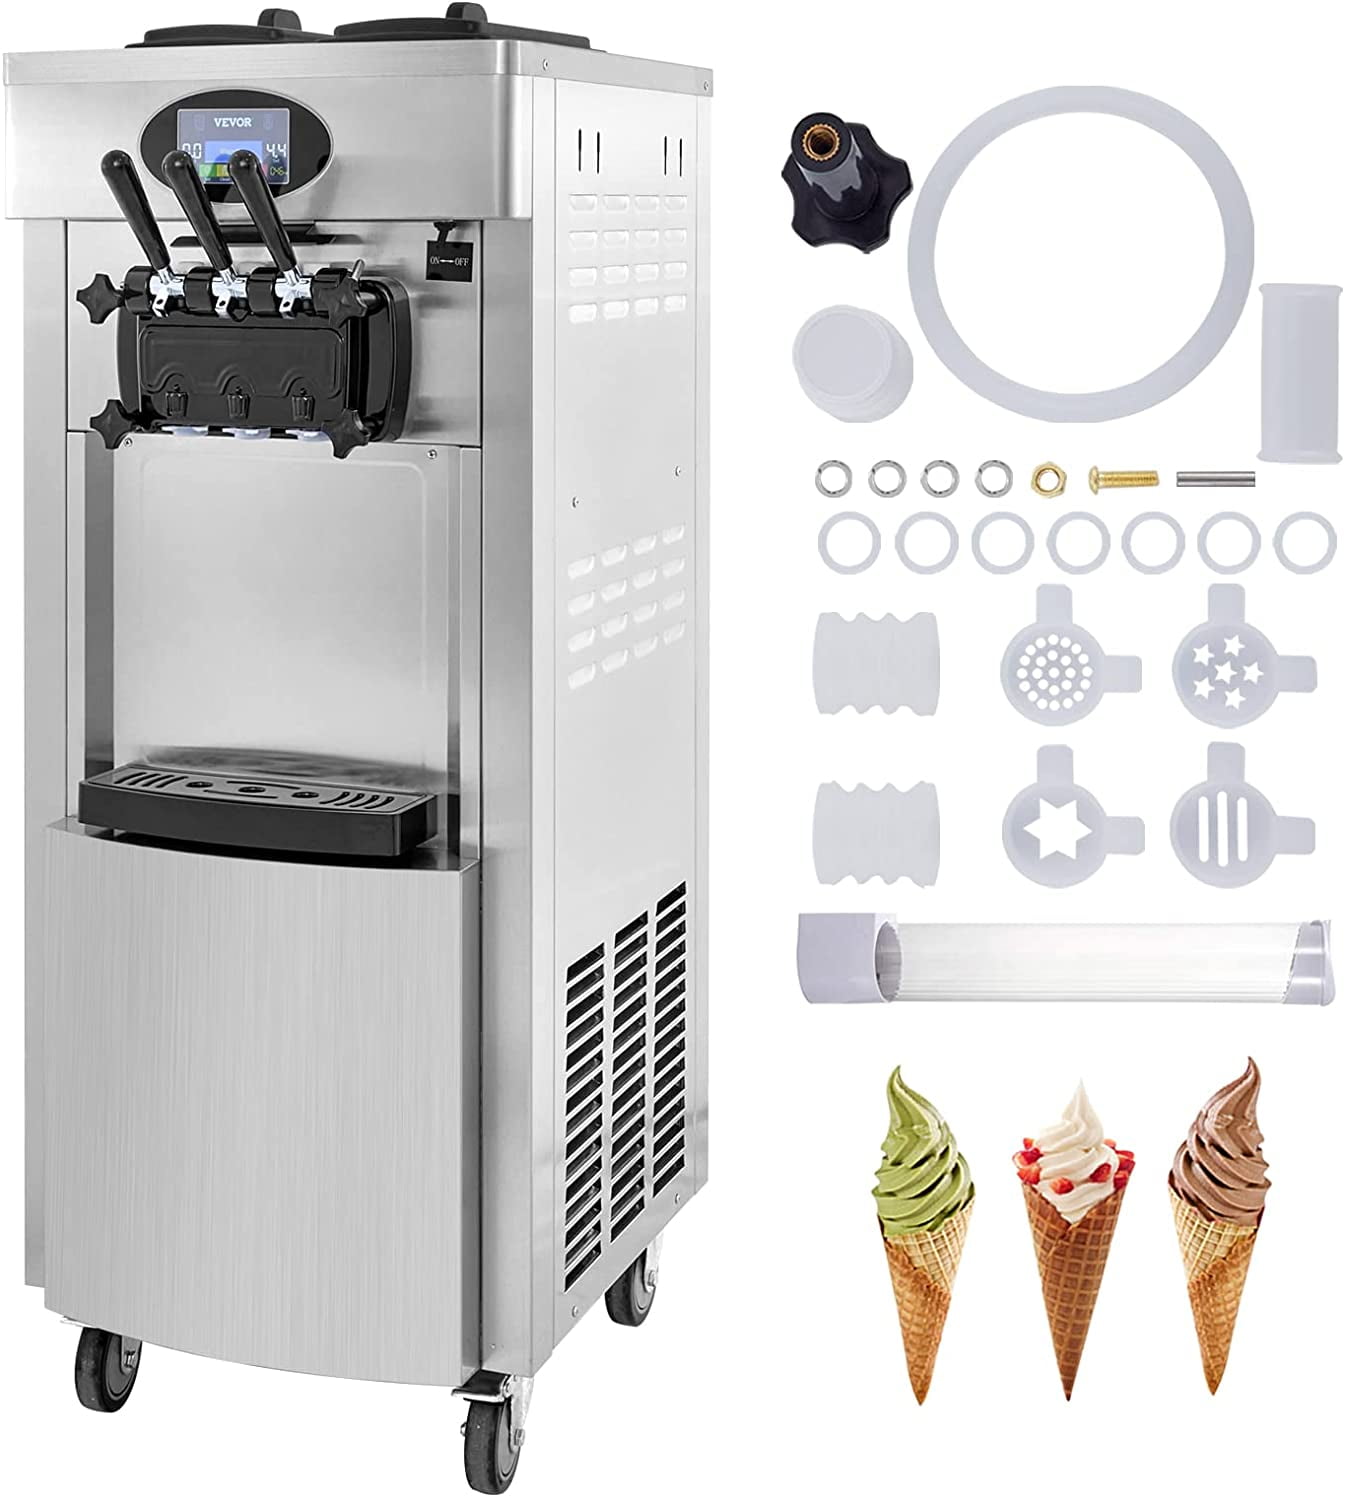 Commercial Professional Automatic Soft Ice Cream Machine, Sundae  Machine,Ice Cream Making Machine,Stainless Steel,Smart Control Panel